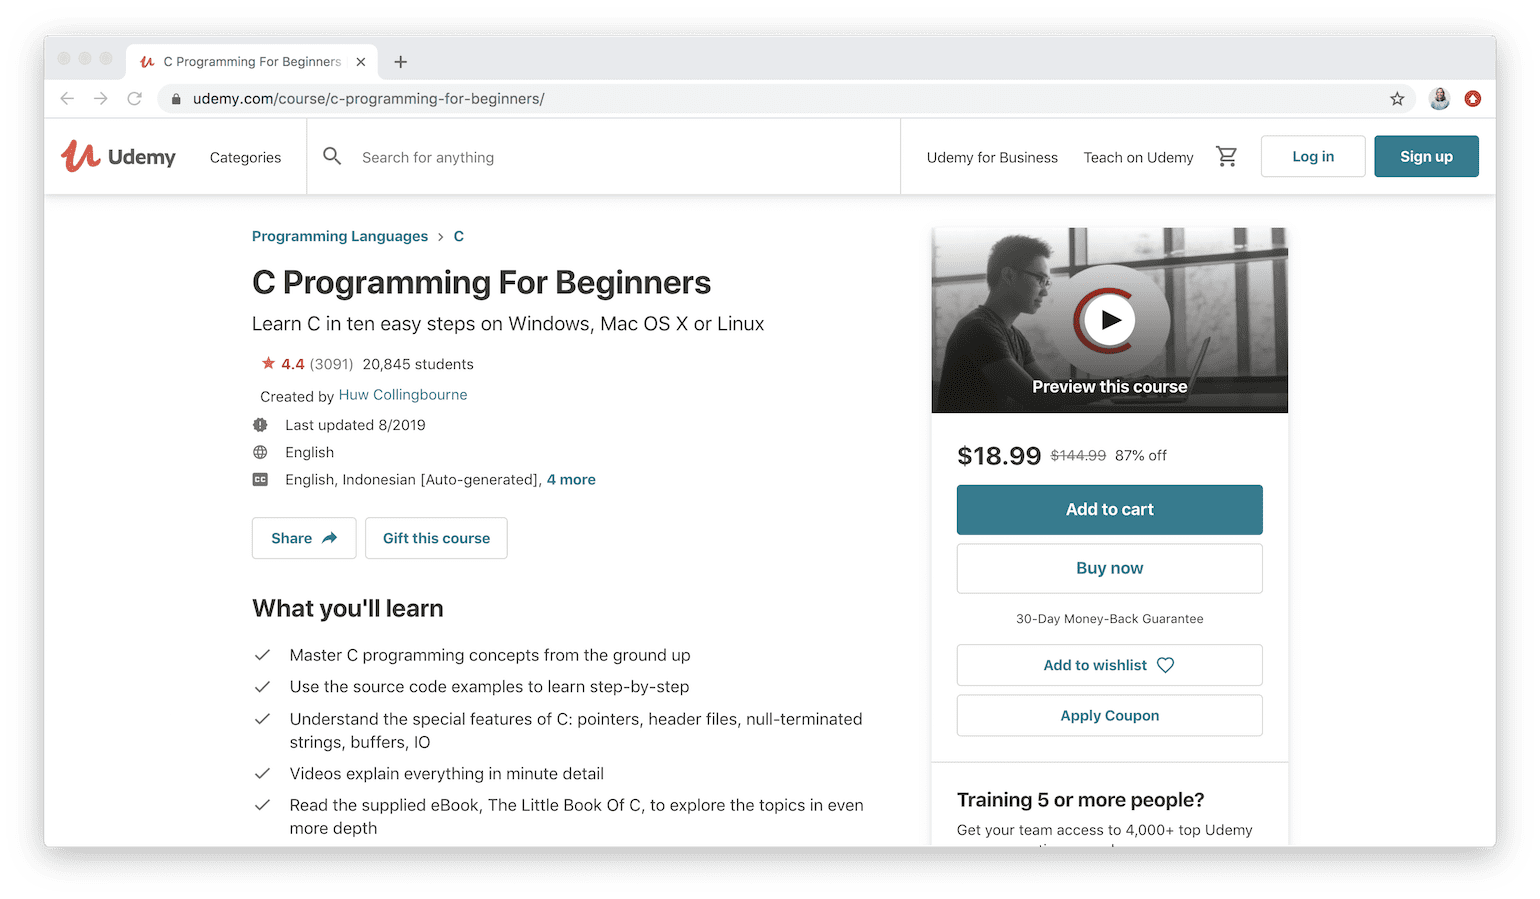 C Programming for Beginners on Udemy